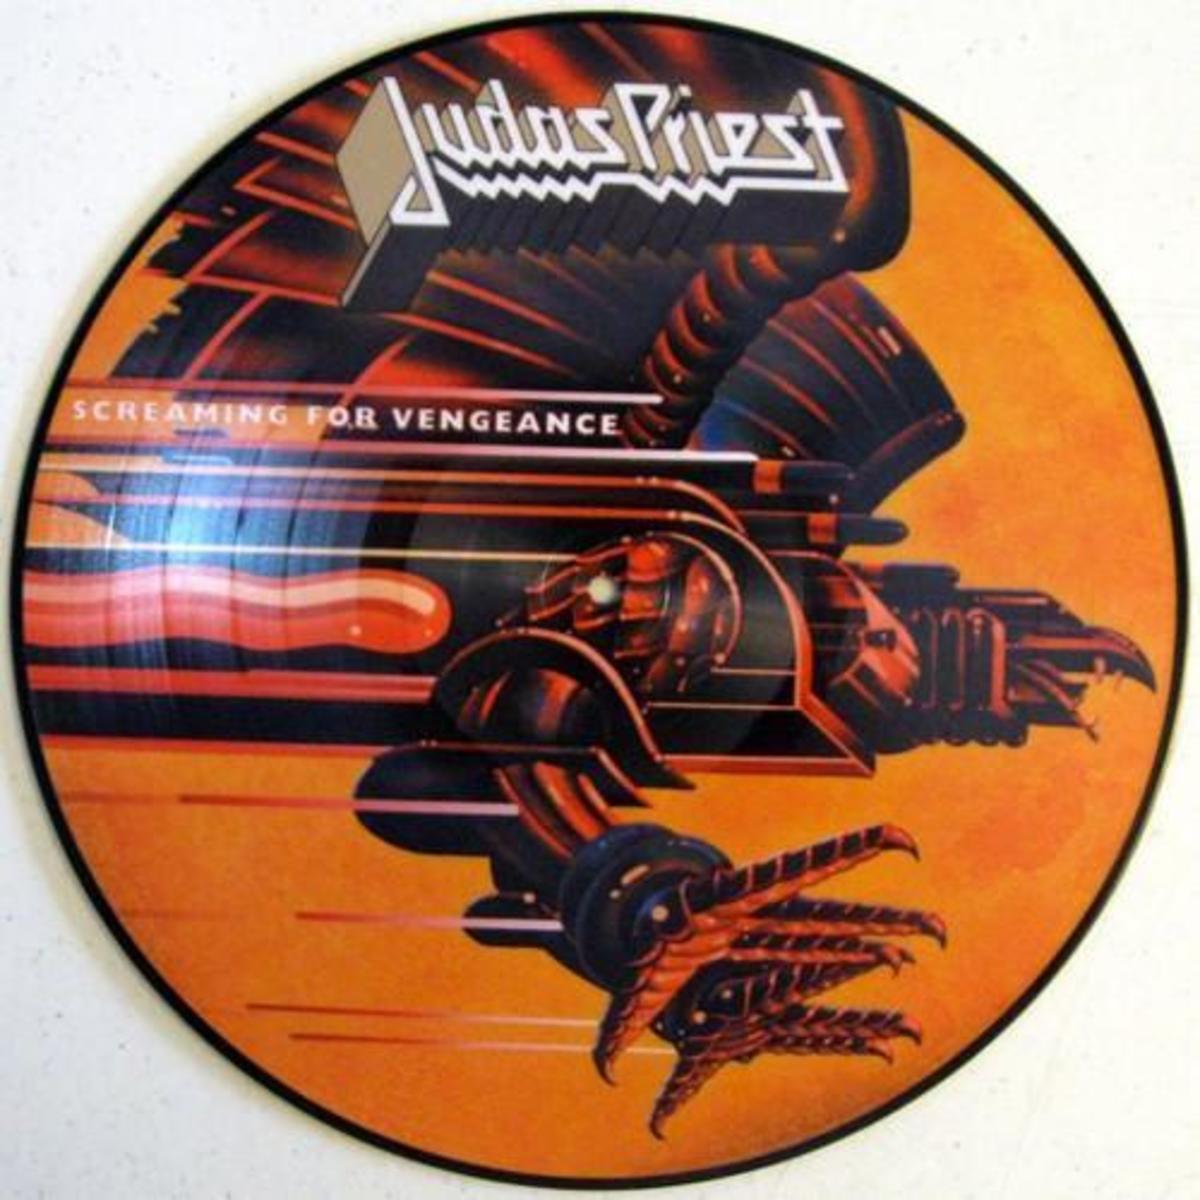 Get a Screaming for Vengeance picture disc